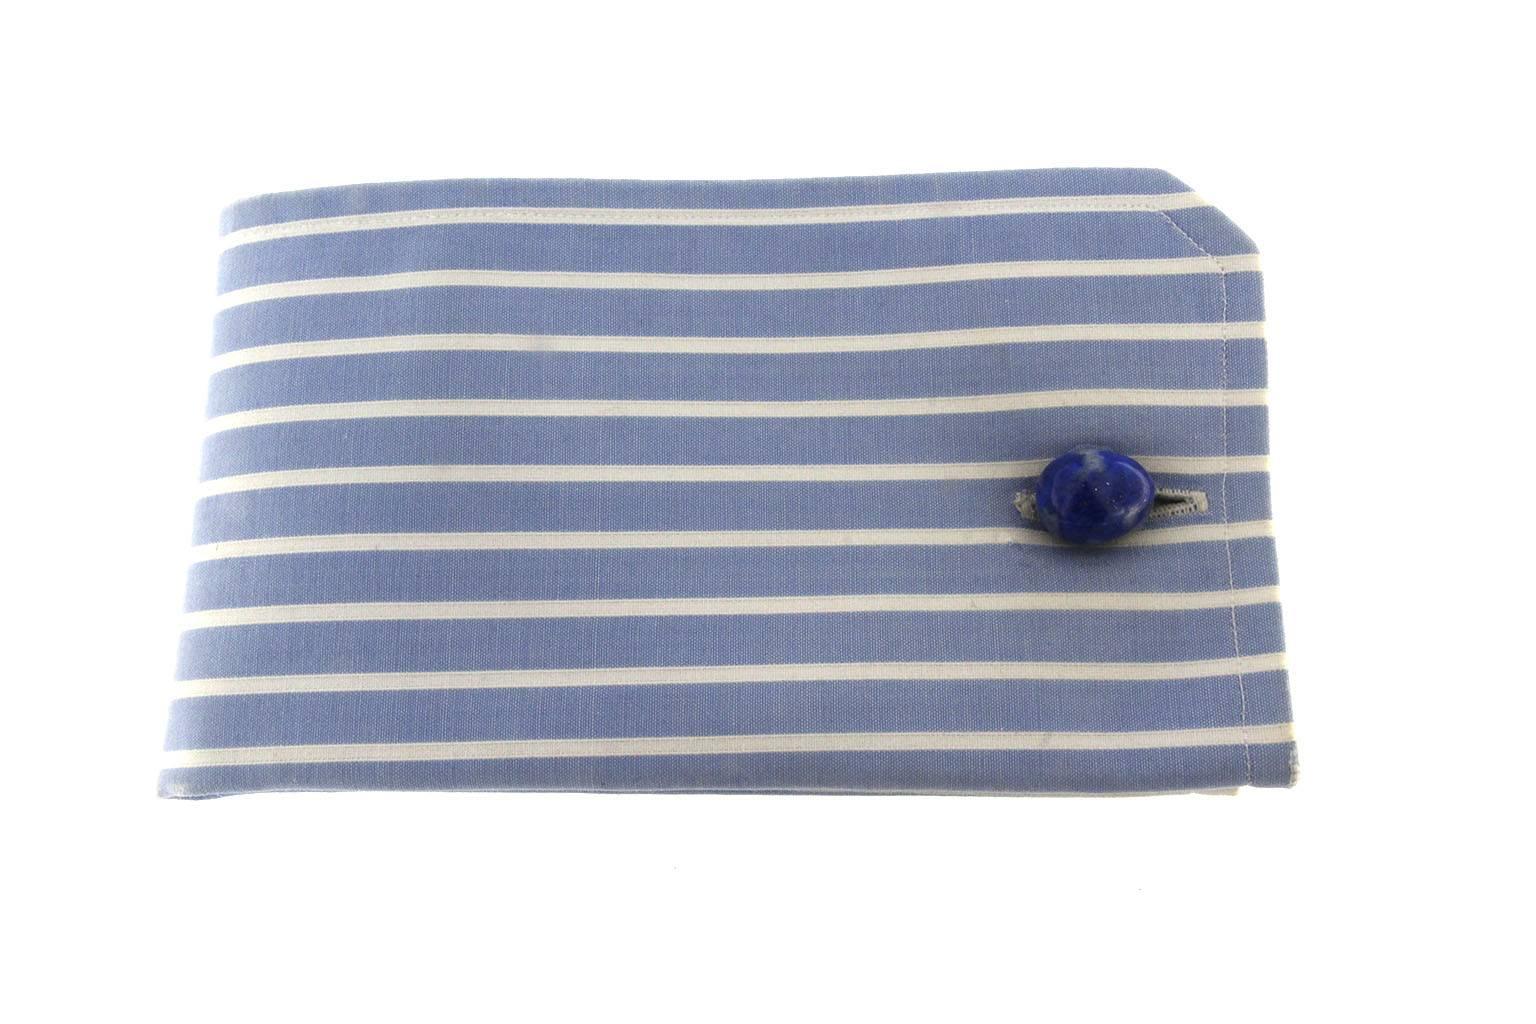 Alex Jona design collection, crafted in Italy, 18 karat yellow gold, hand-carved egg-shape Lapis Lazuli cufflinks.

Alex Jona cufflinks stand out, not only for their special design and for the excellent quality, but also for the careful attention